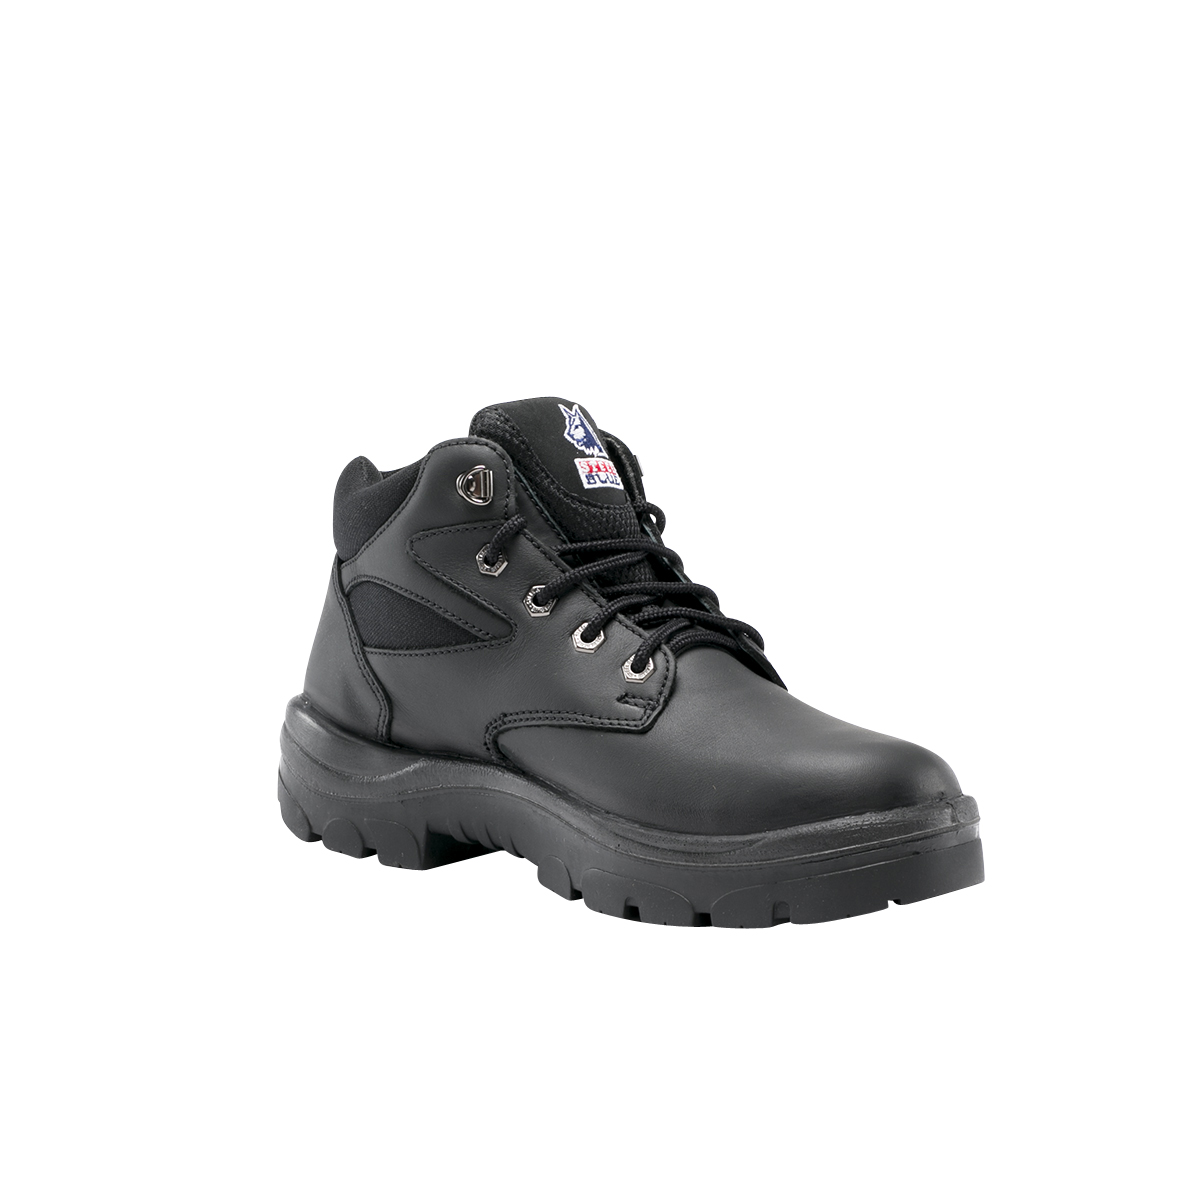 SAFETY BOOT WHYALLA MID CUT S10 BLACK